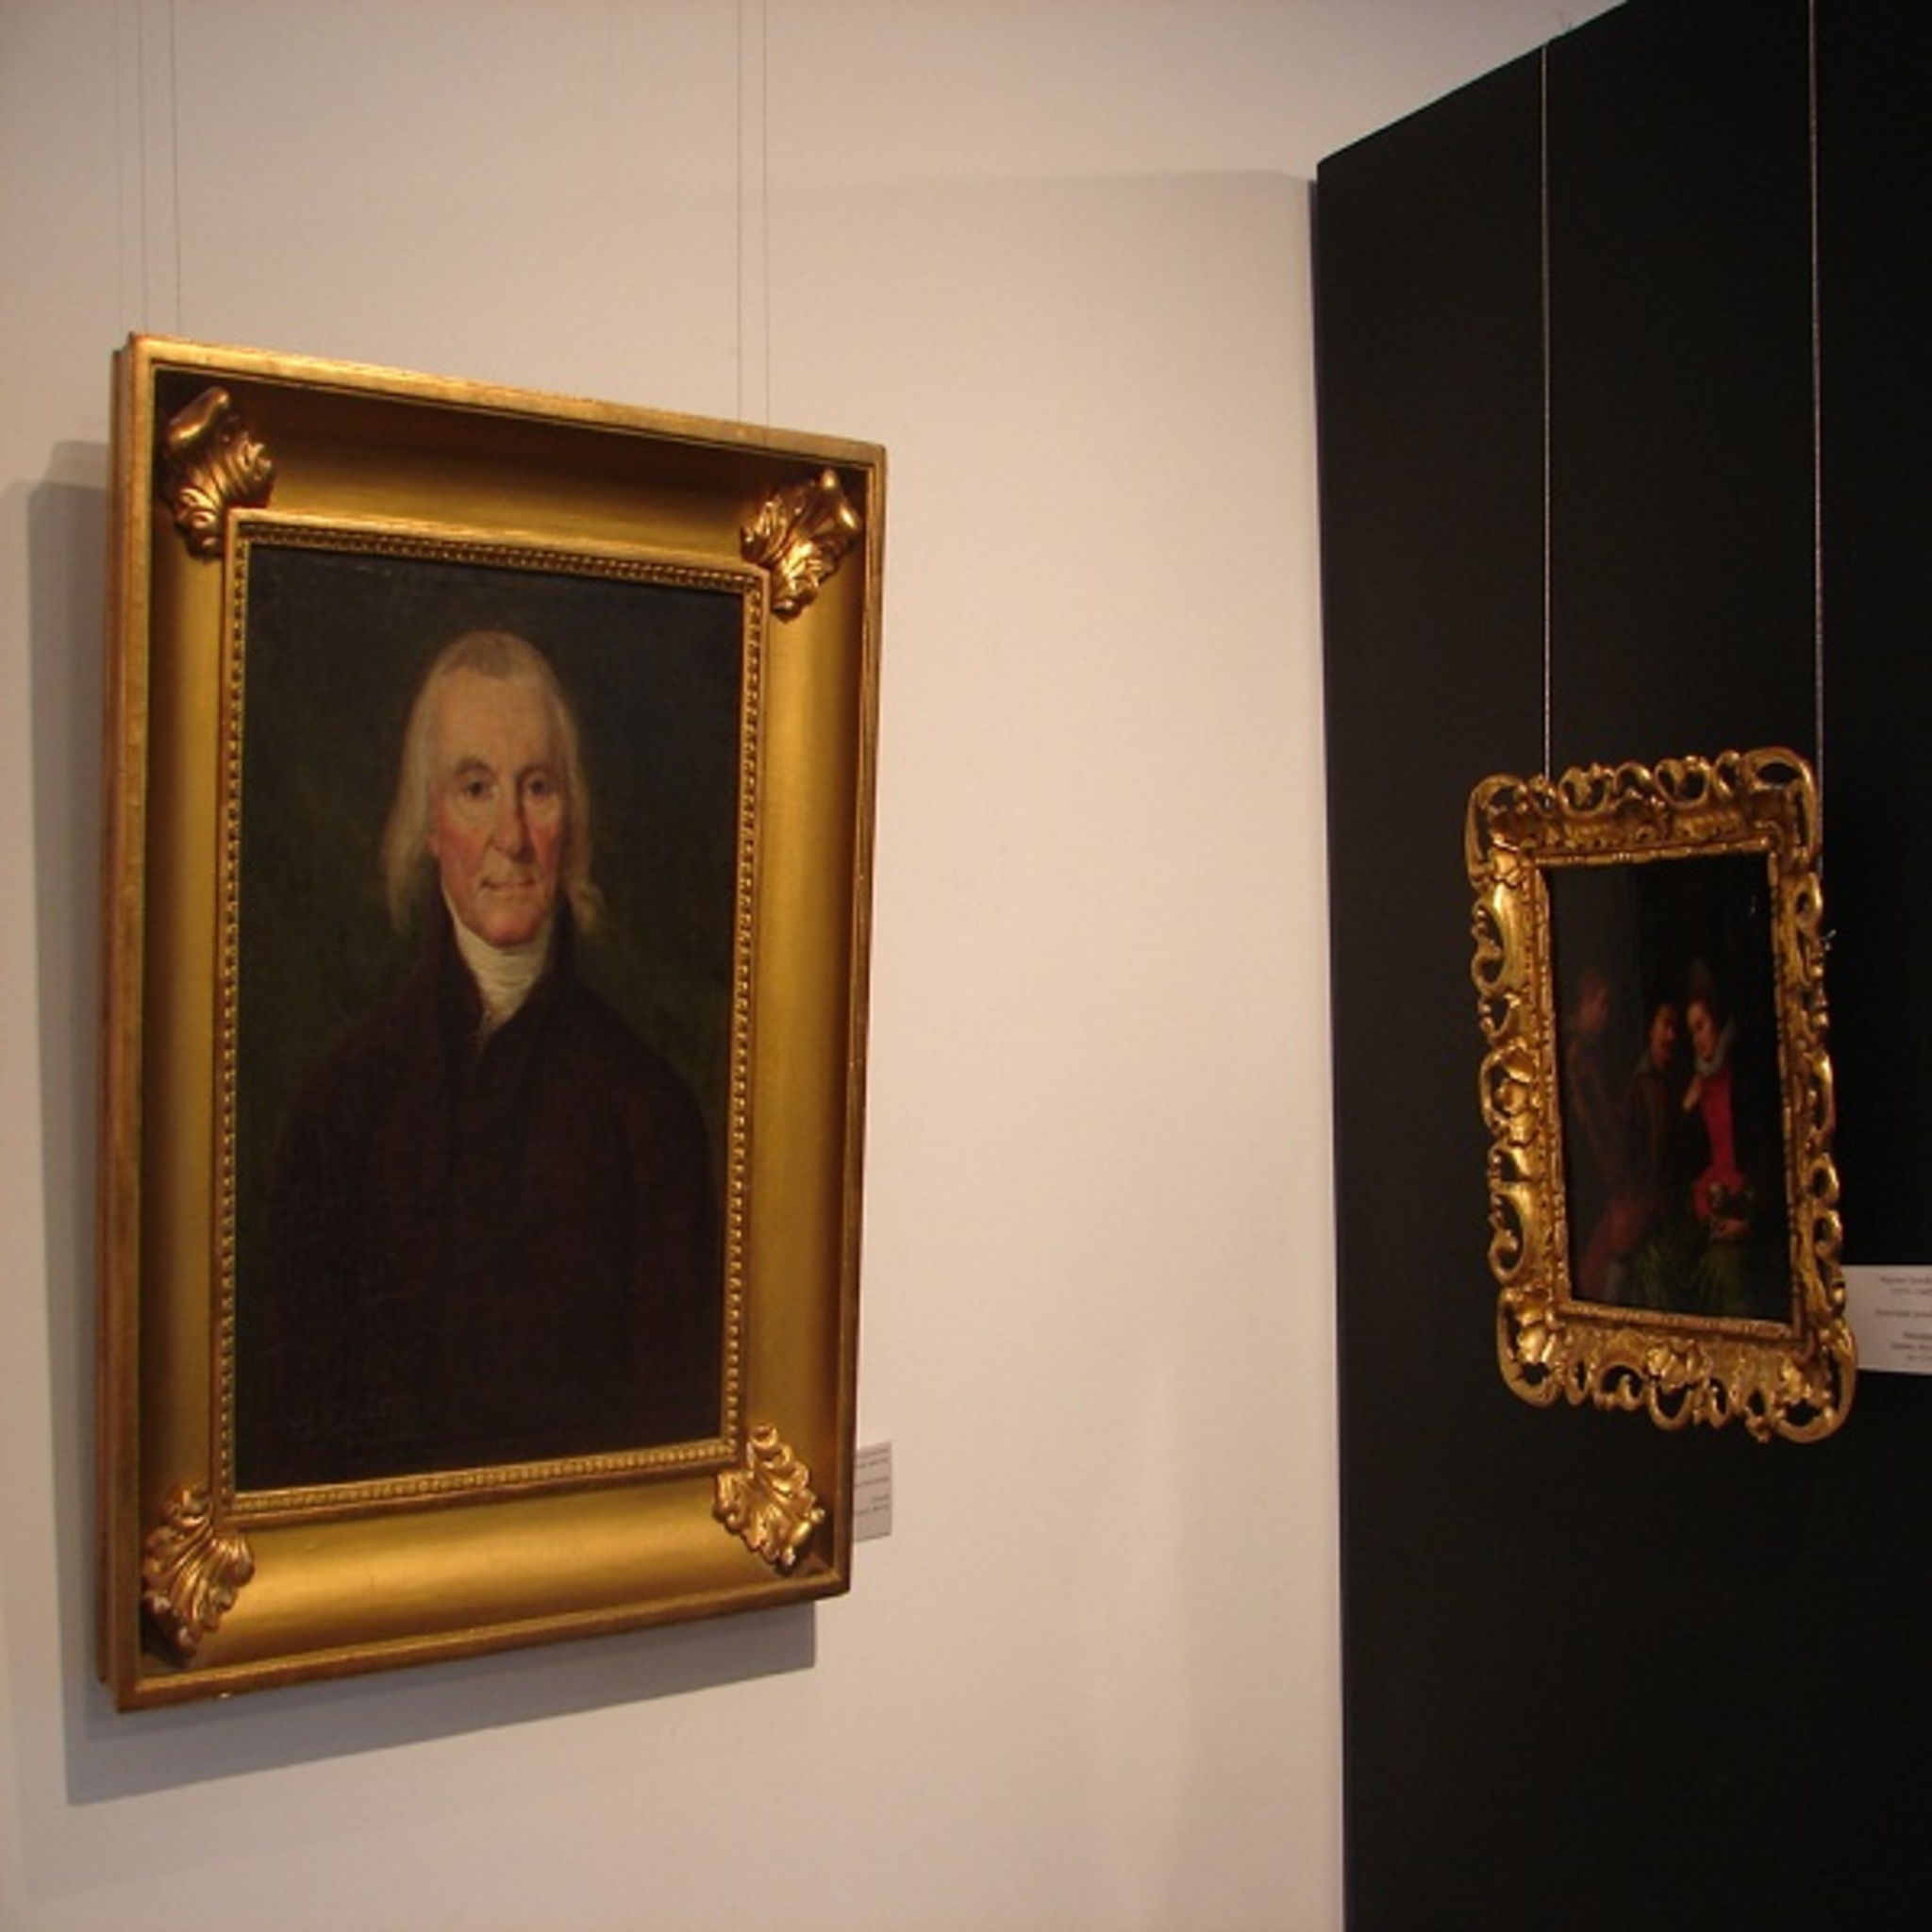 The exhibition Old Masters in KGallery